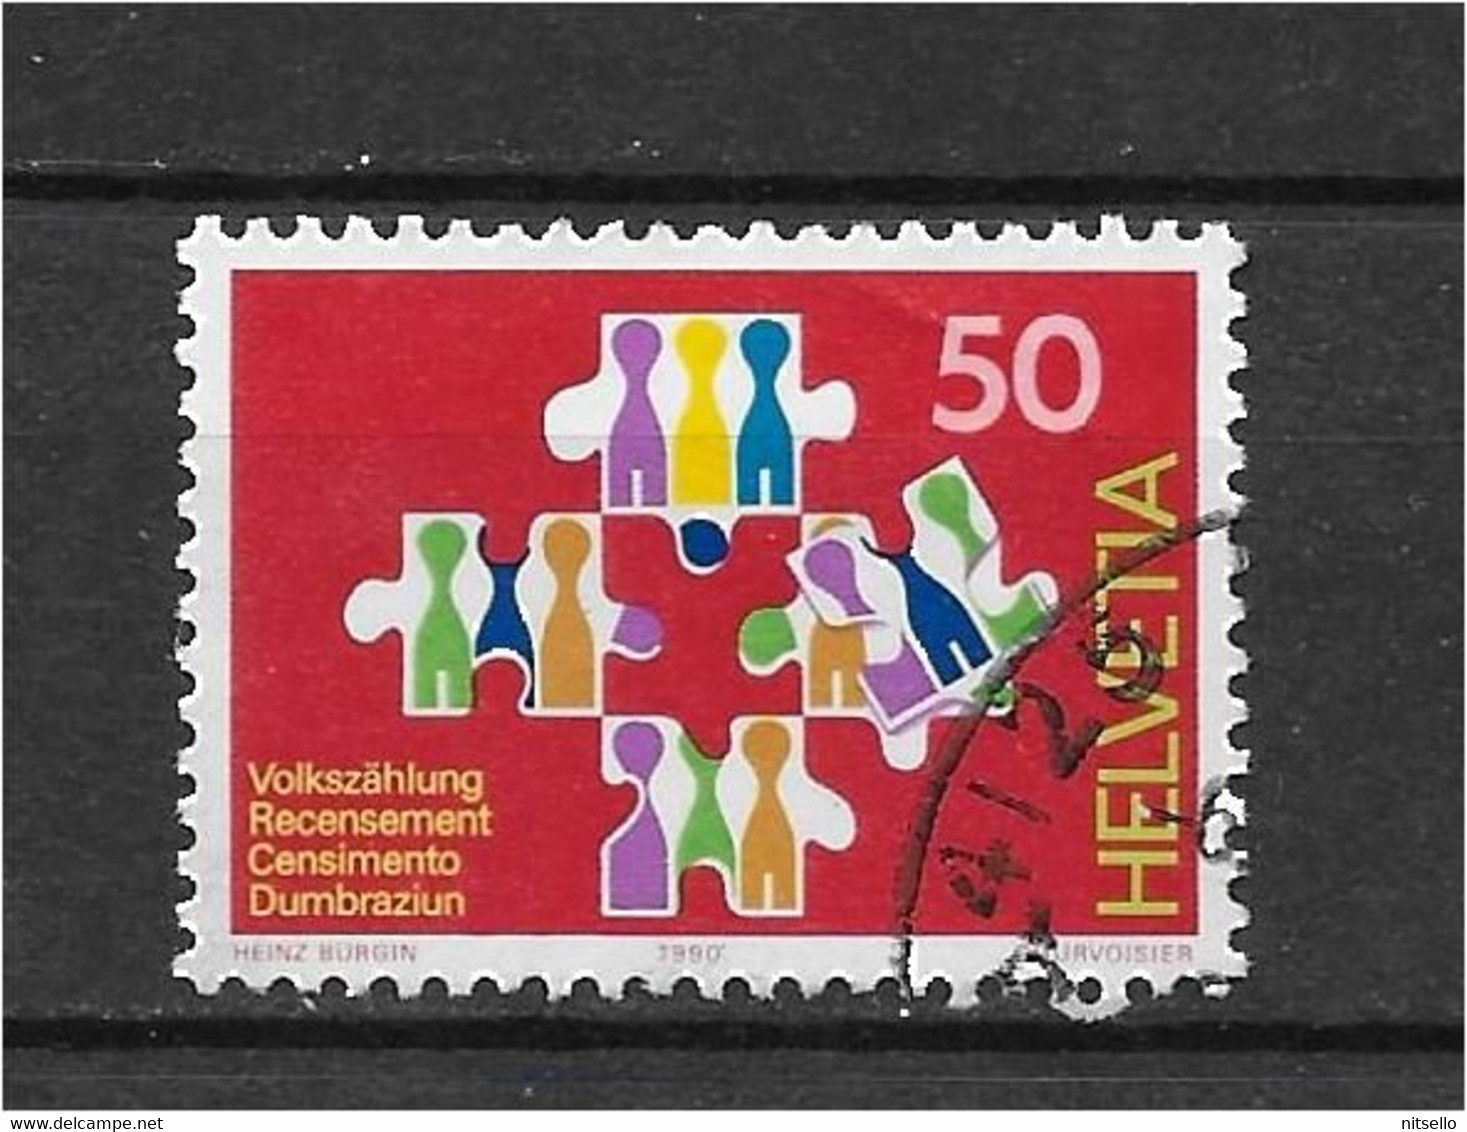 LOTE 1530A /// SUIZA YVERT Nº: 1363  ¡¡¡ OFERTA - LIQUIDATION - JE LIQUIDE !!! - Used Stamps